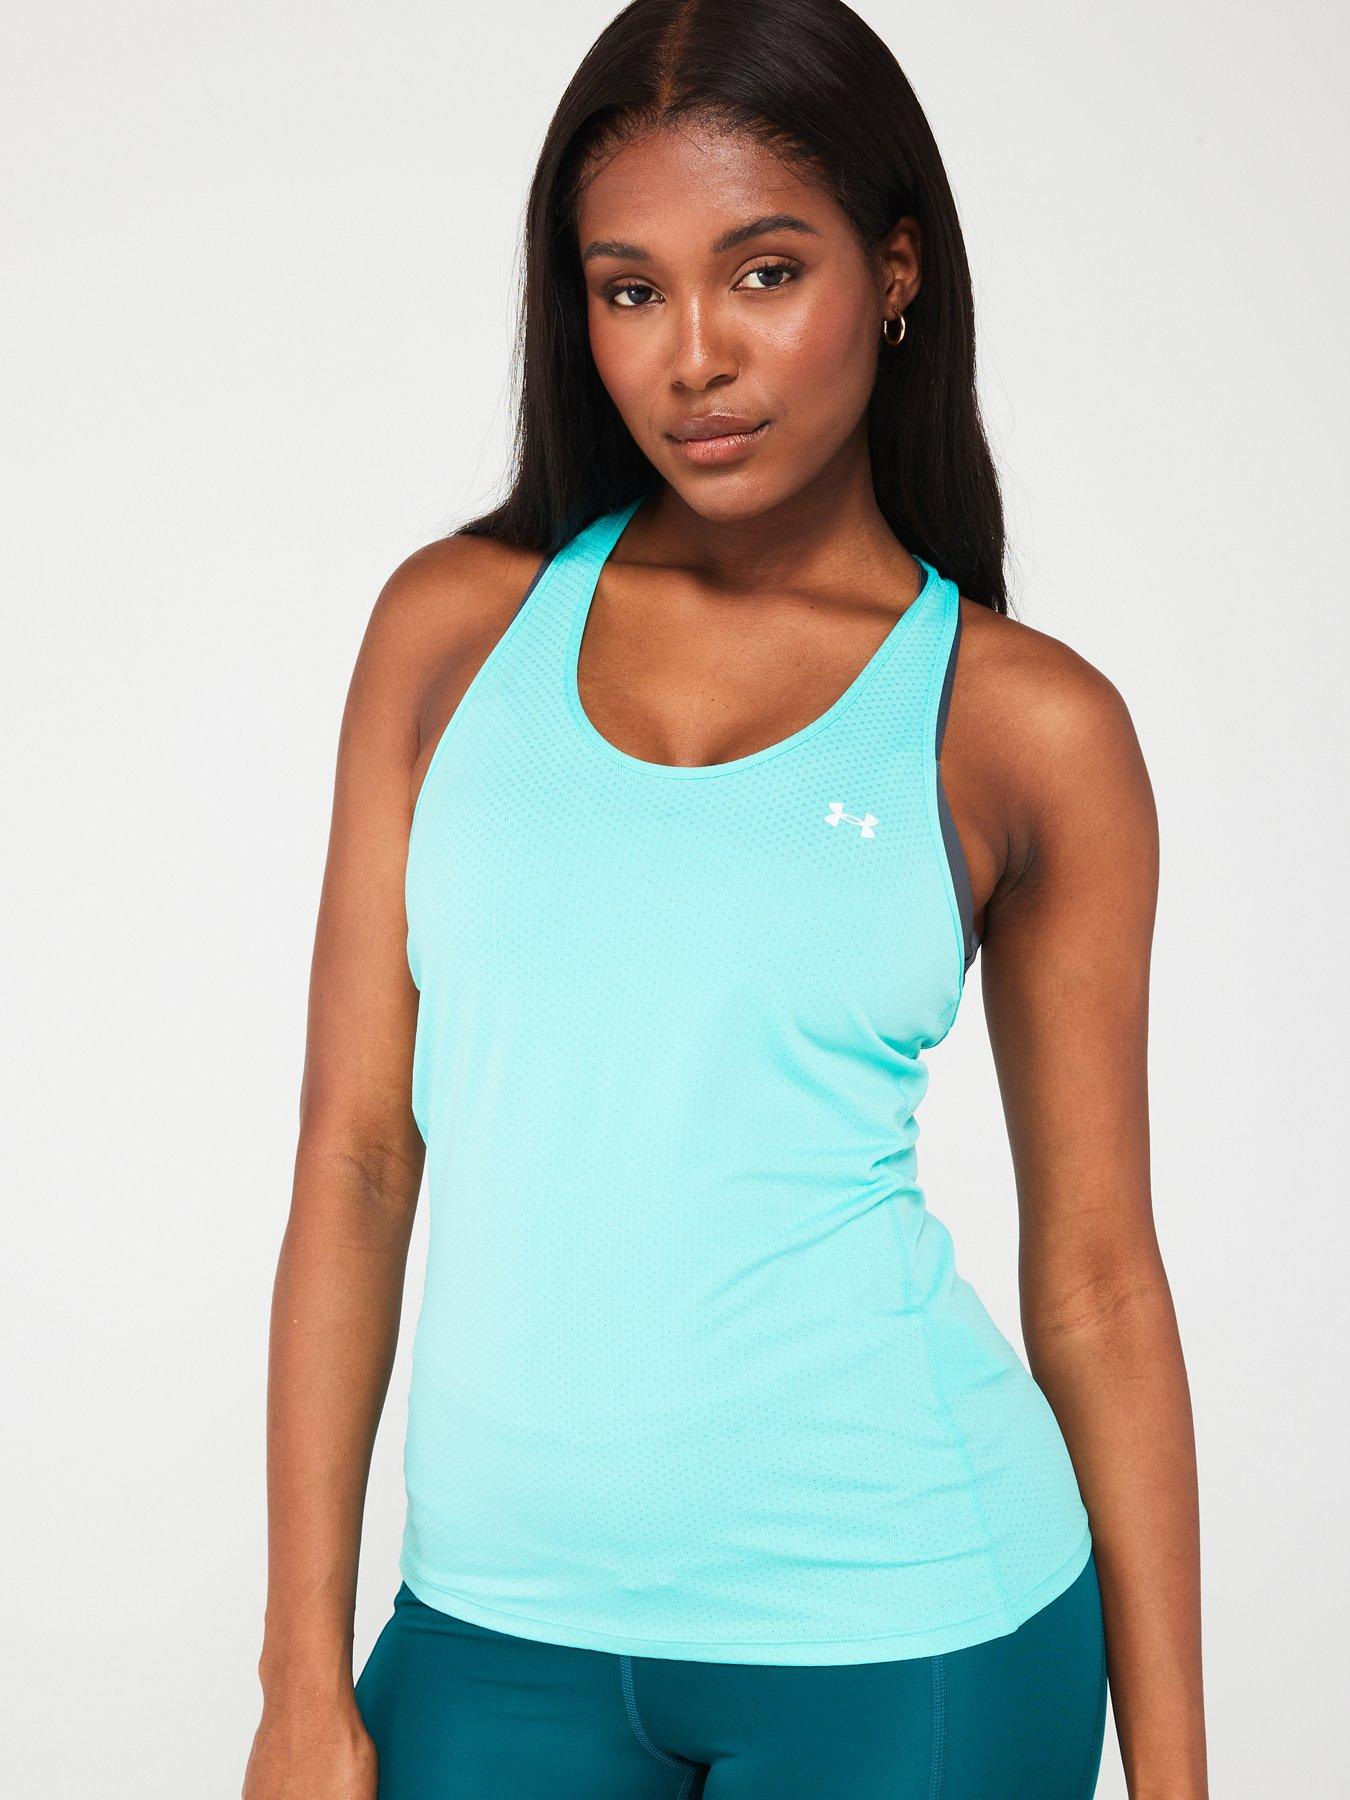 Under armour, Vests, Womens sports clothing, Sports & leisure